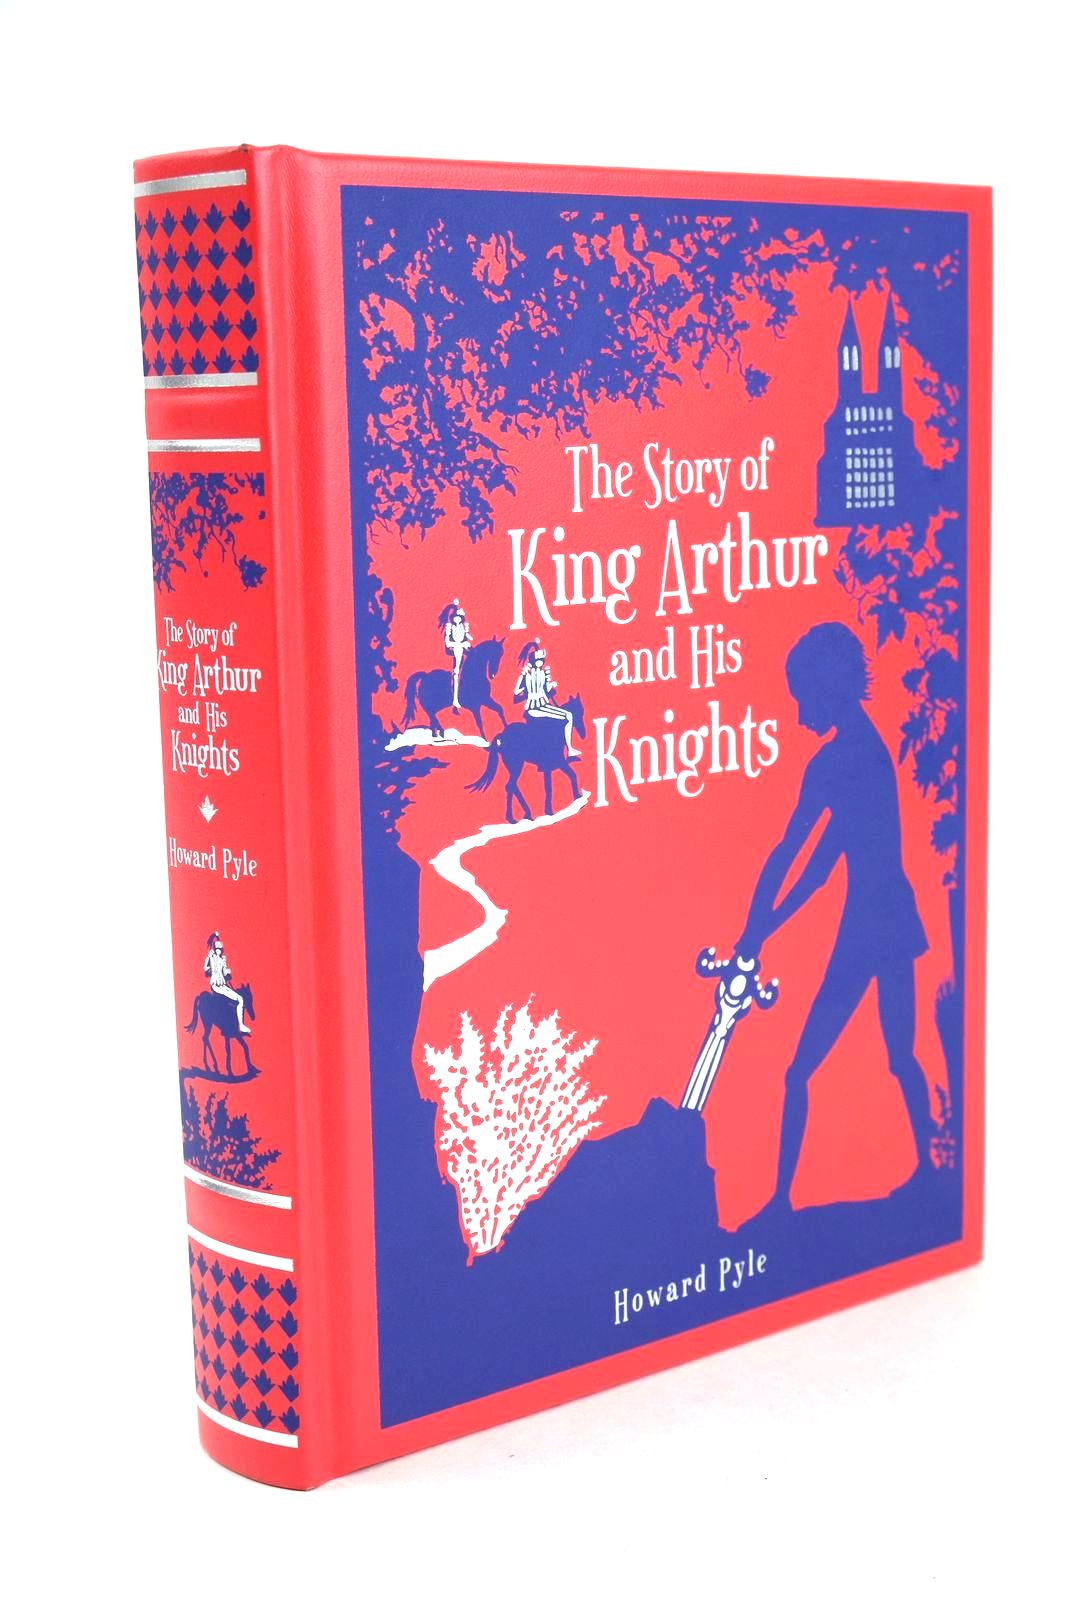 Photo of THE STORY OF KING ARTHUR AND HIS KNIGHTS written by Pyle, Howard illustrated by Pyle, Howard published by Barnes &amp; Noble Inc. (STOCK CODE: 1326212)  for sale by Stella & Rose's Books